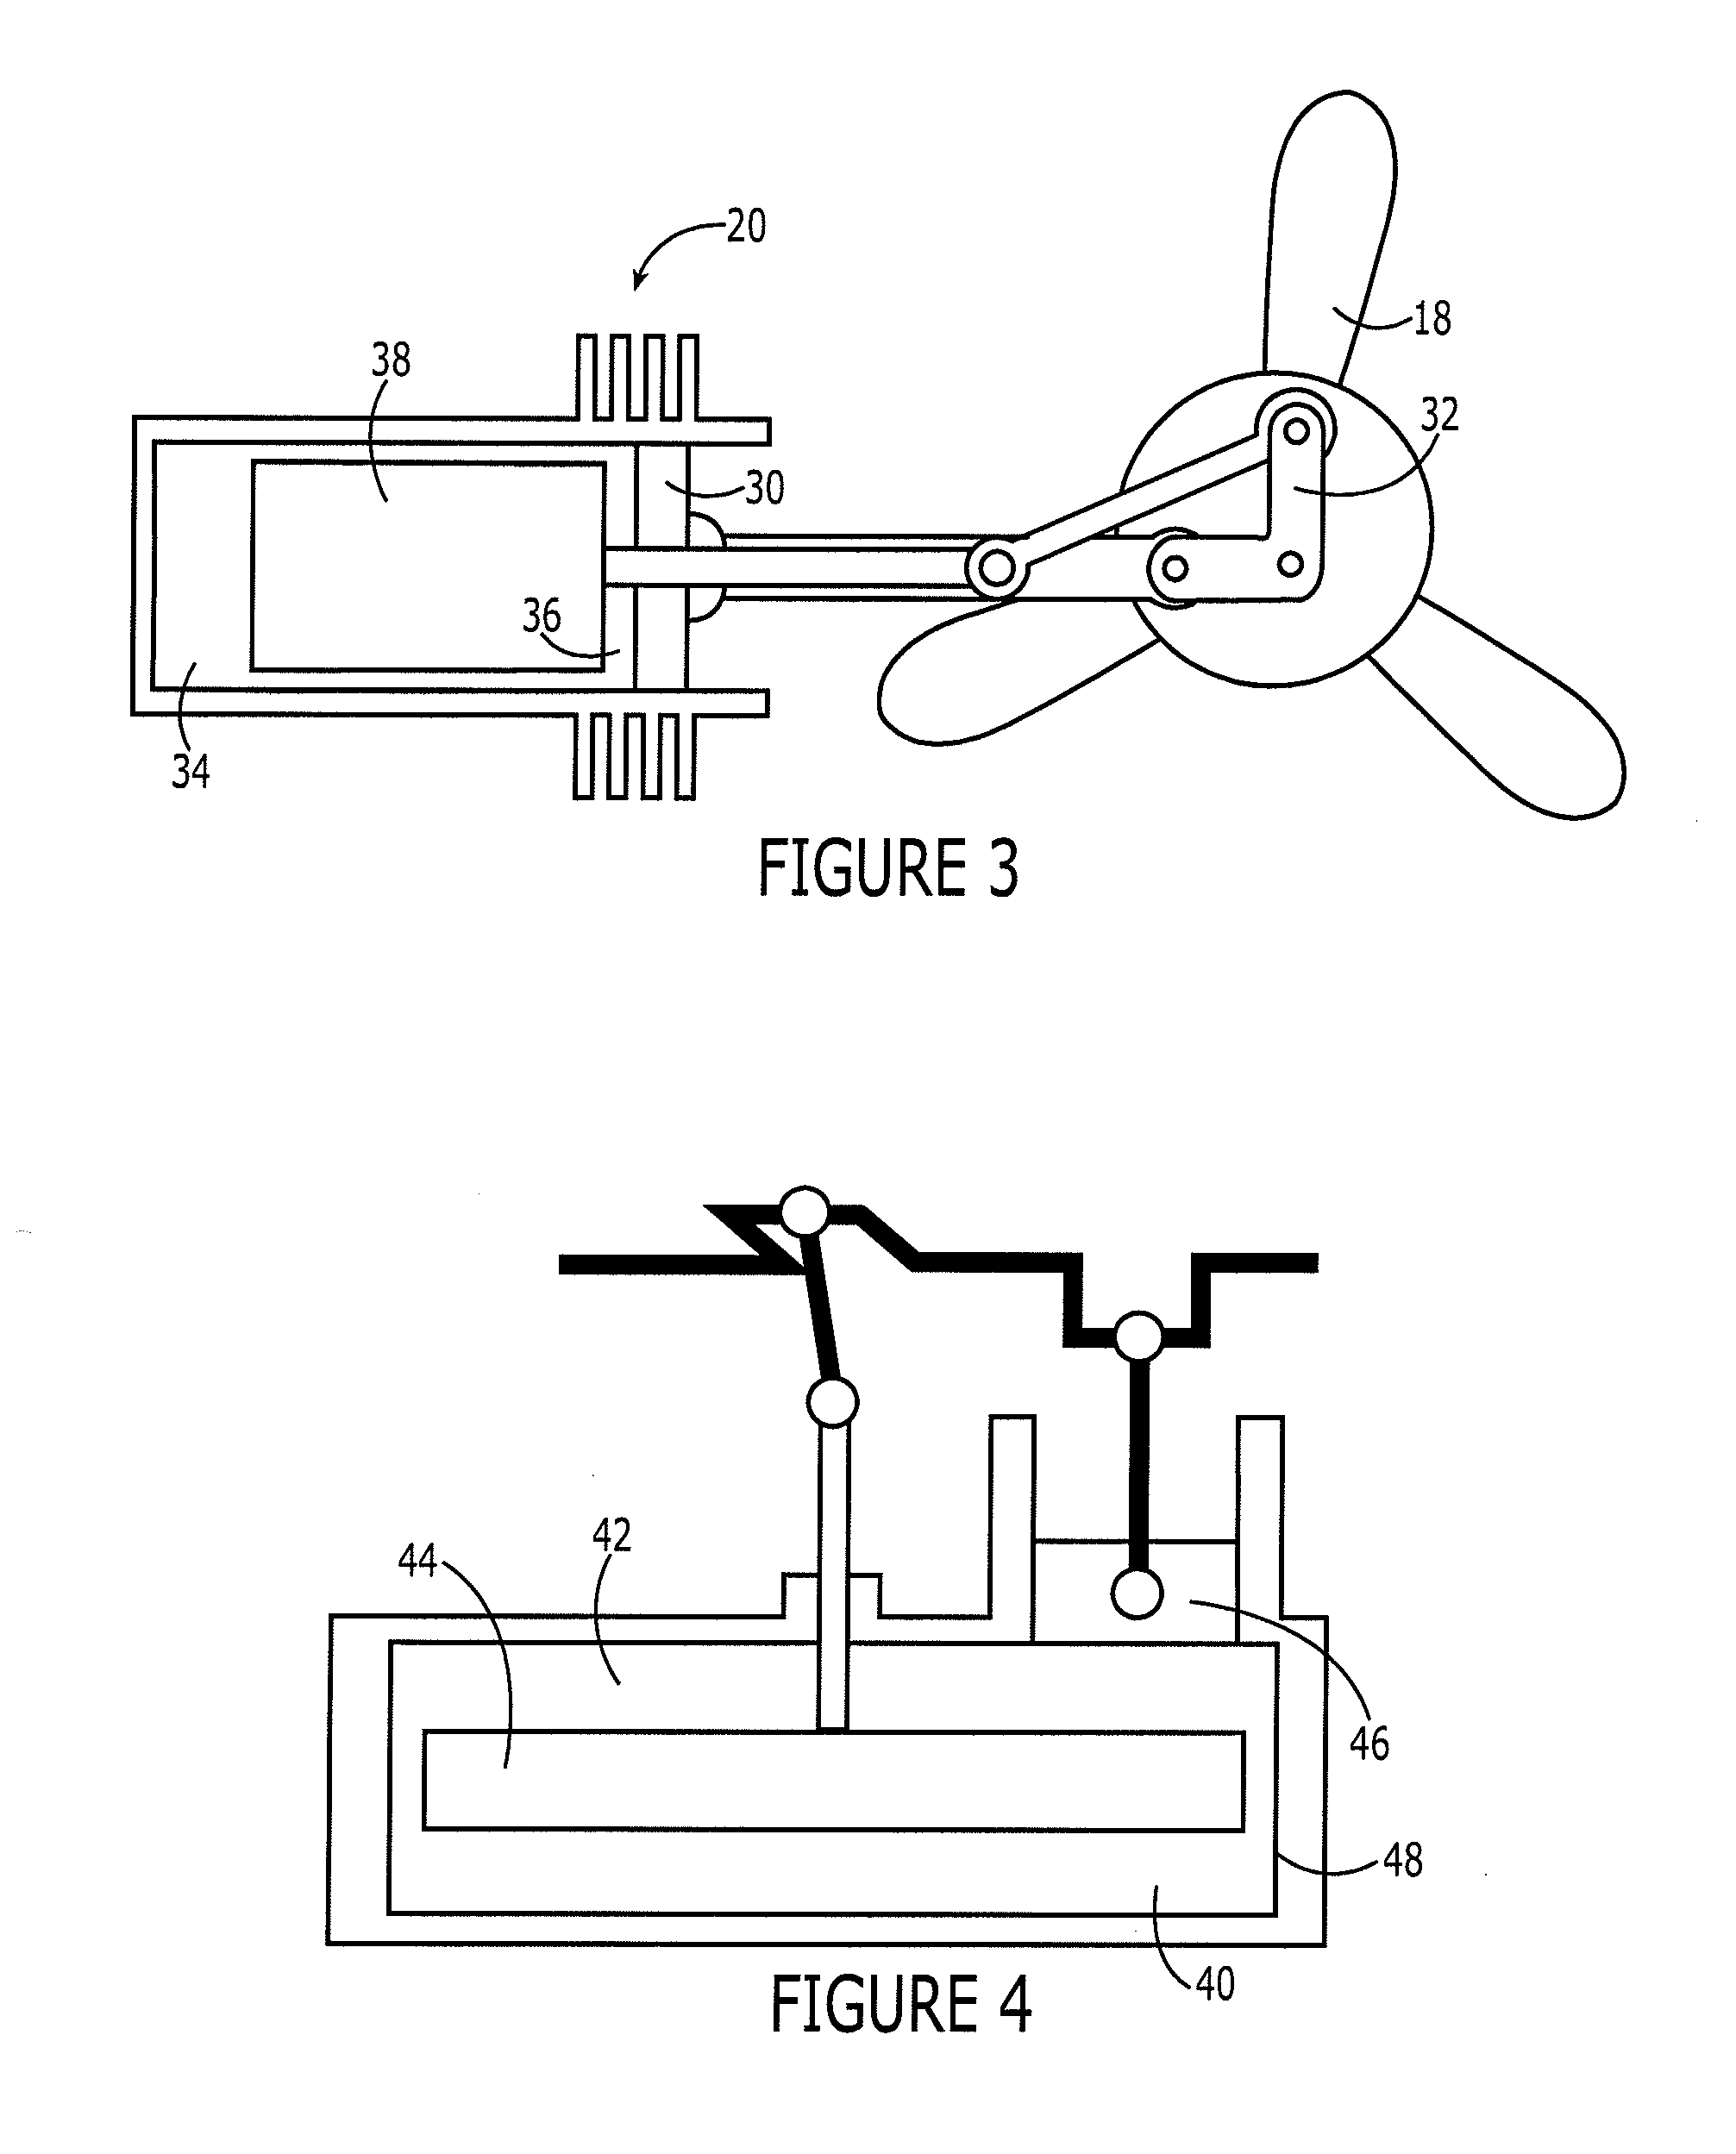 Heat exchanger and associated method employing a stirling engine